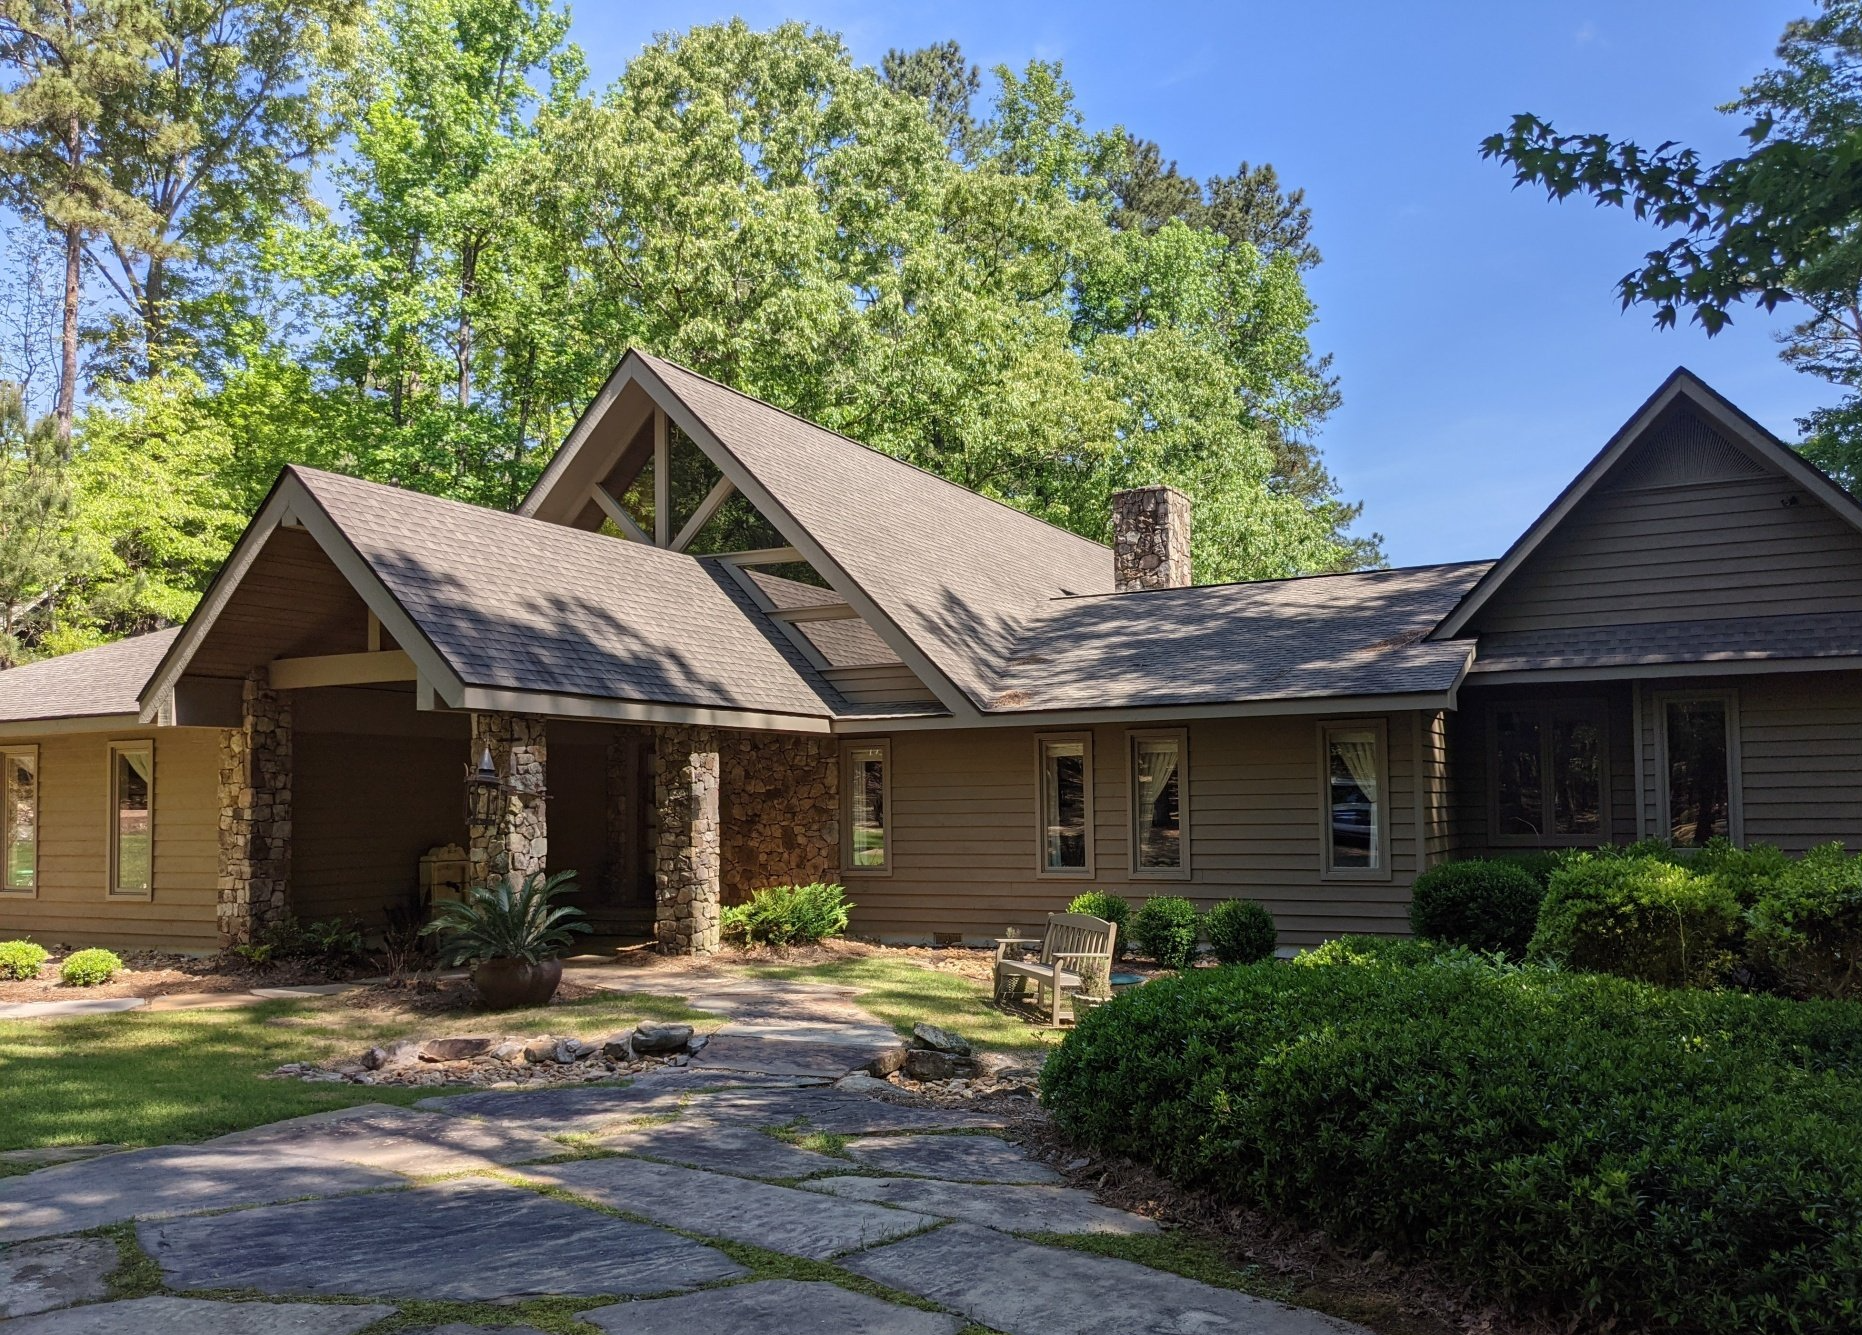 Residential tinting in Alexander City, AL - Energy Efficiency was increaed by over 60% with SPF Performance Tint installed to this home in Alexander City, AL